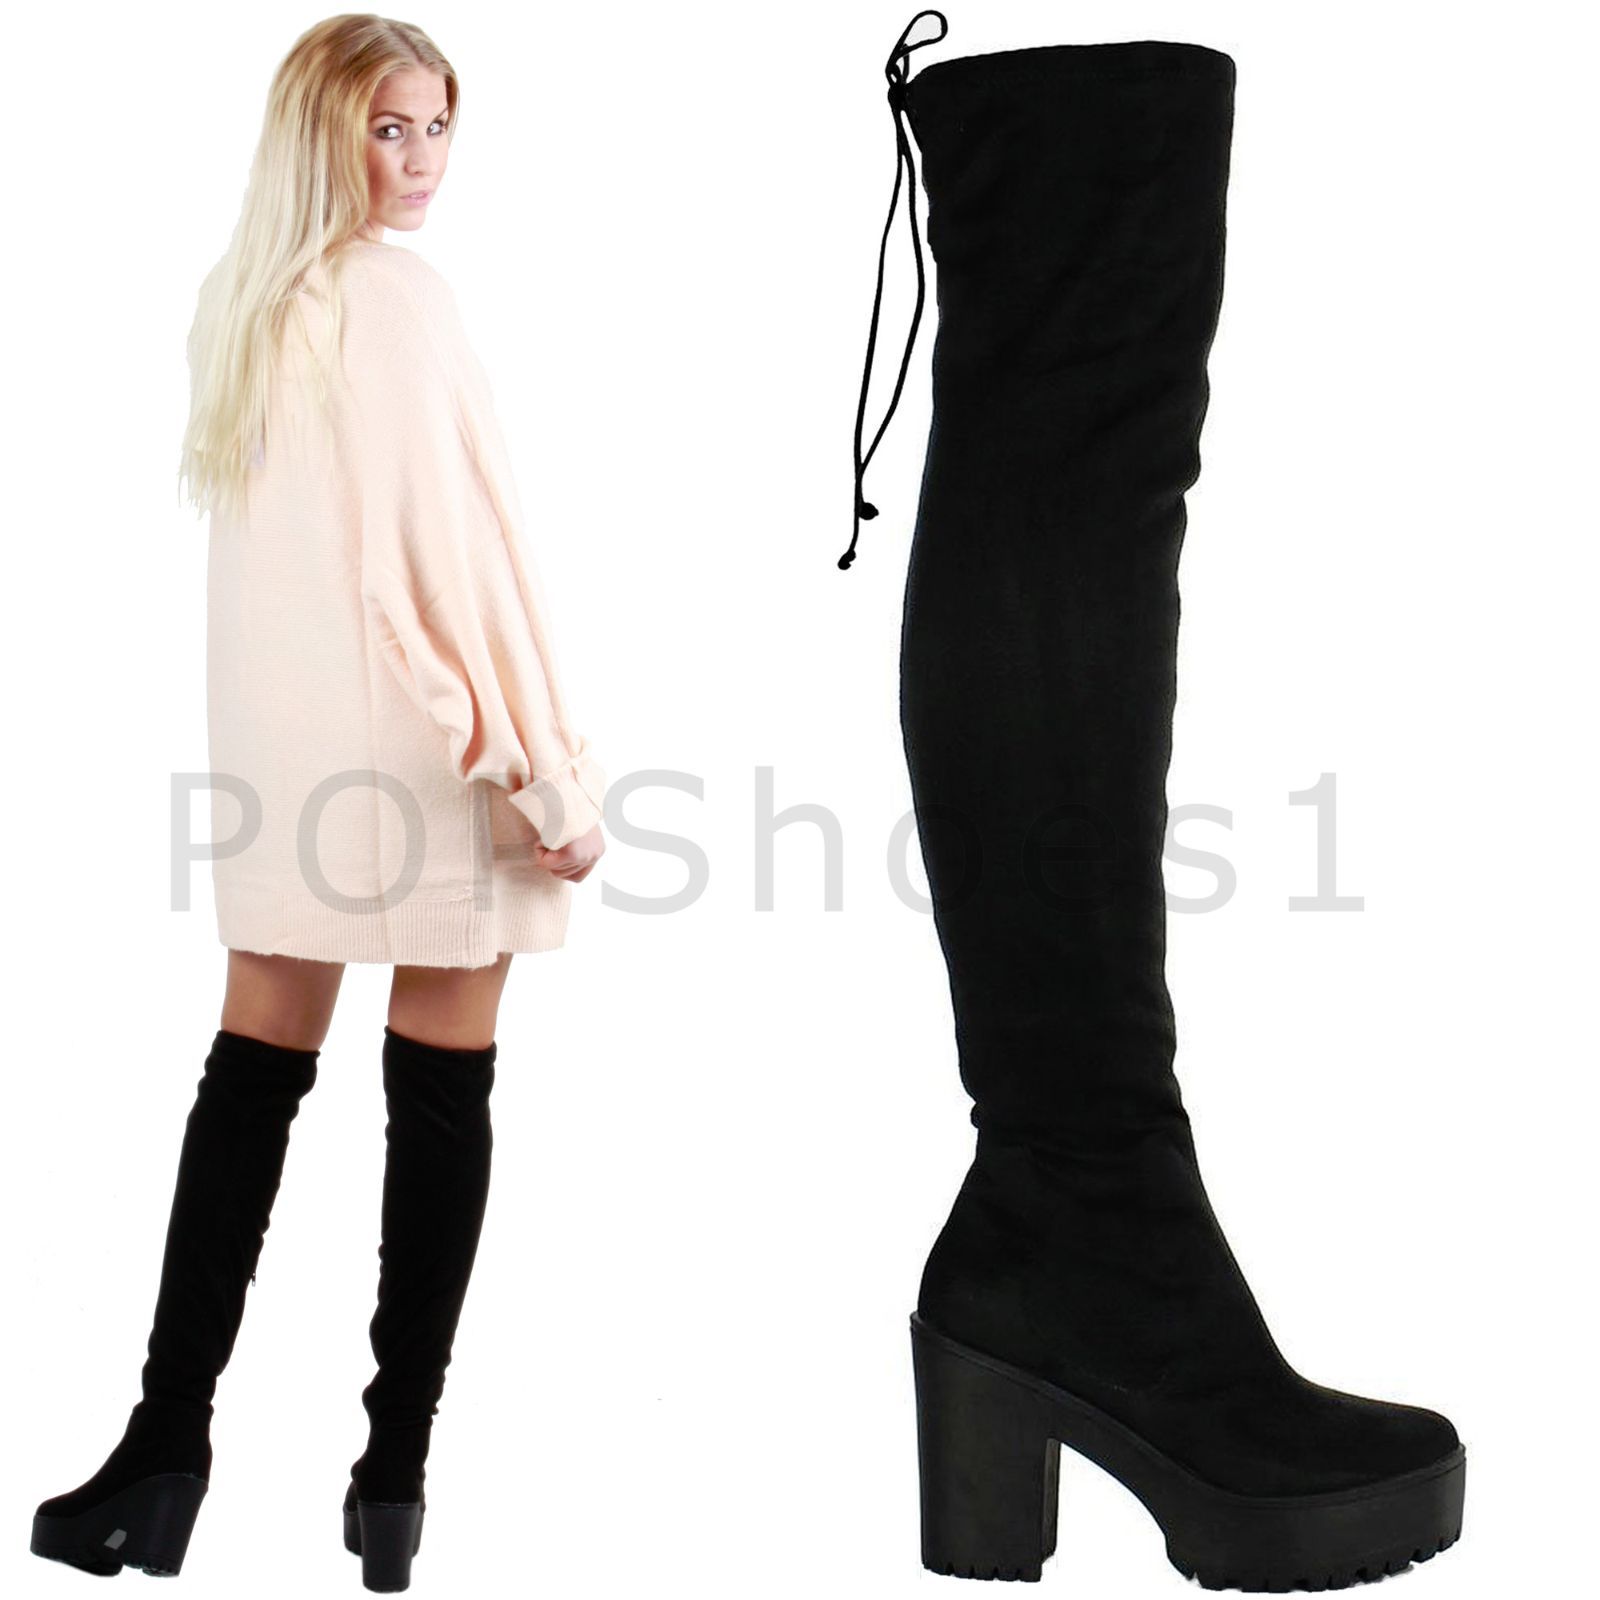 WOMENS LADIES OVER THE KNEE THIGH HIGH CHUNKY PLATFORM HEEL STRETCH BOOTS SIZE